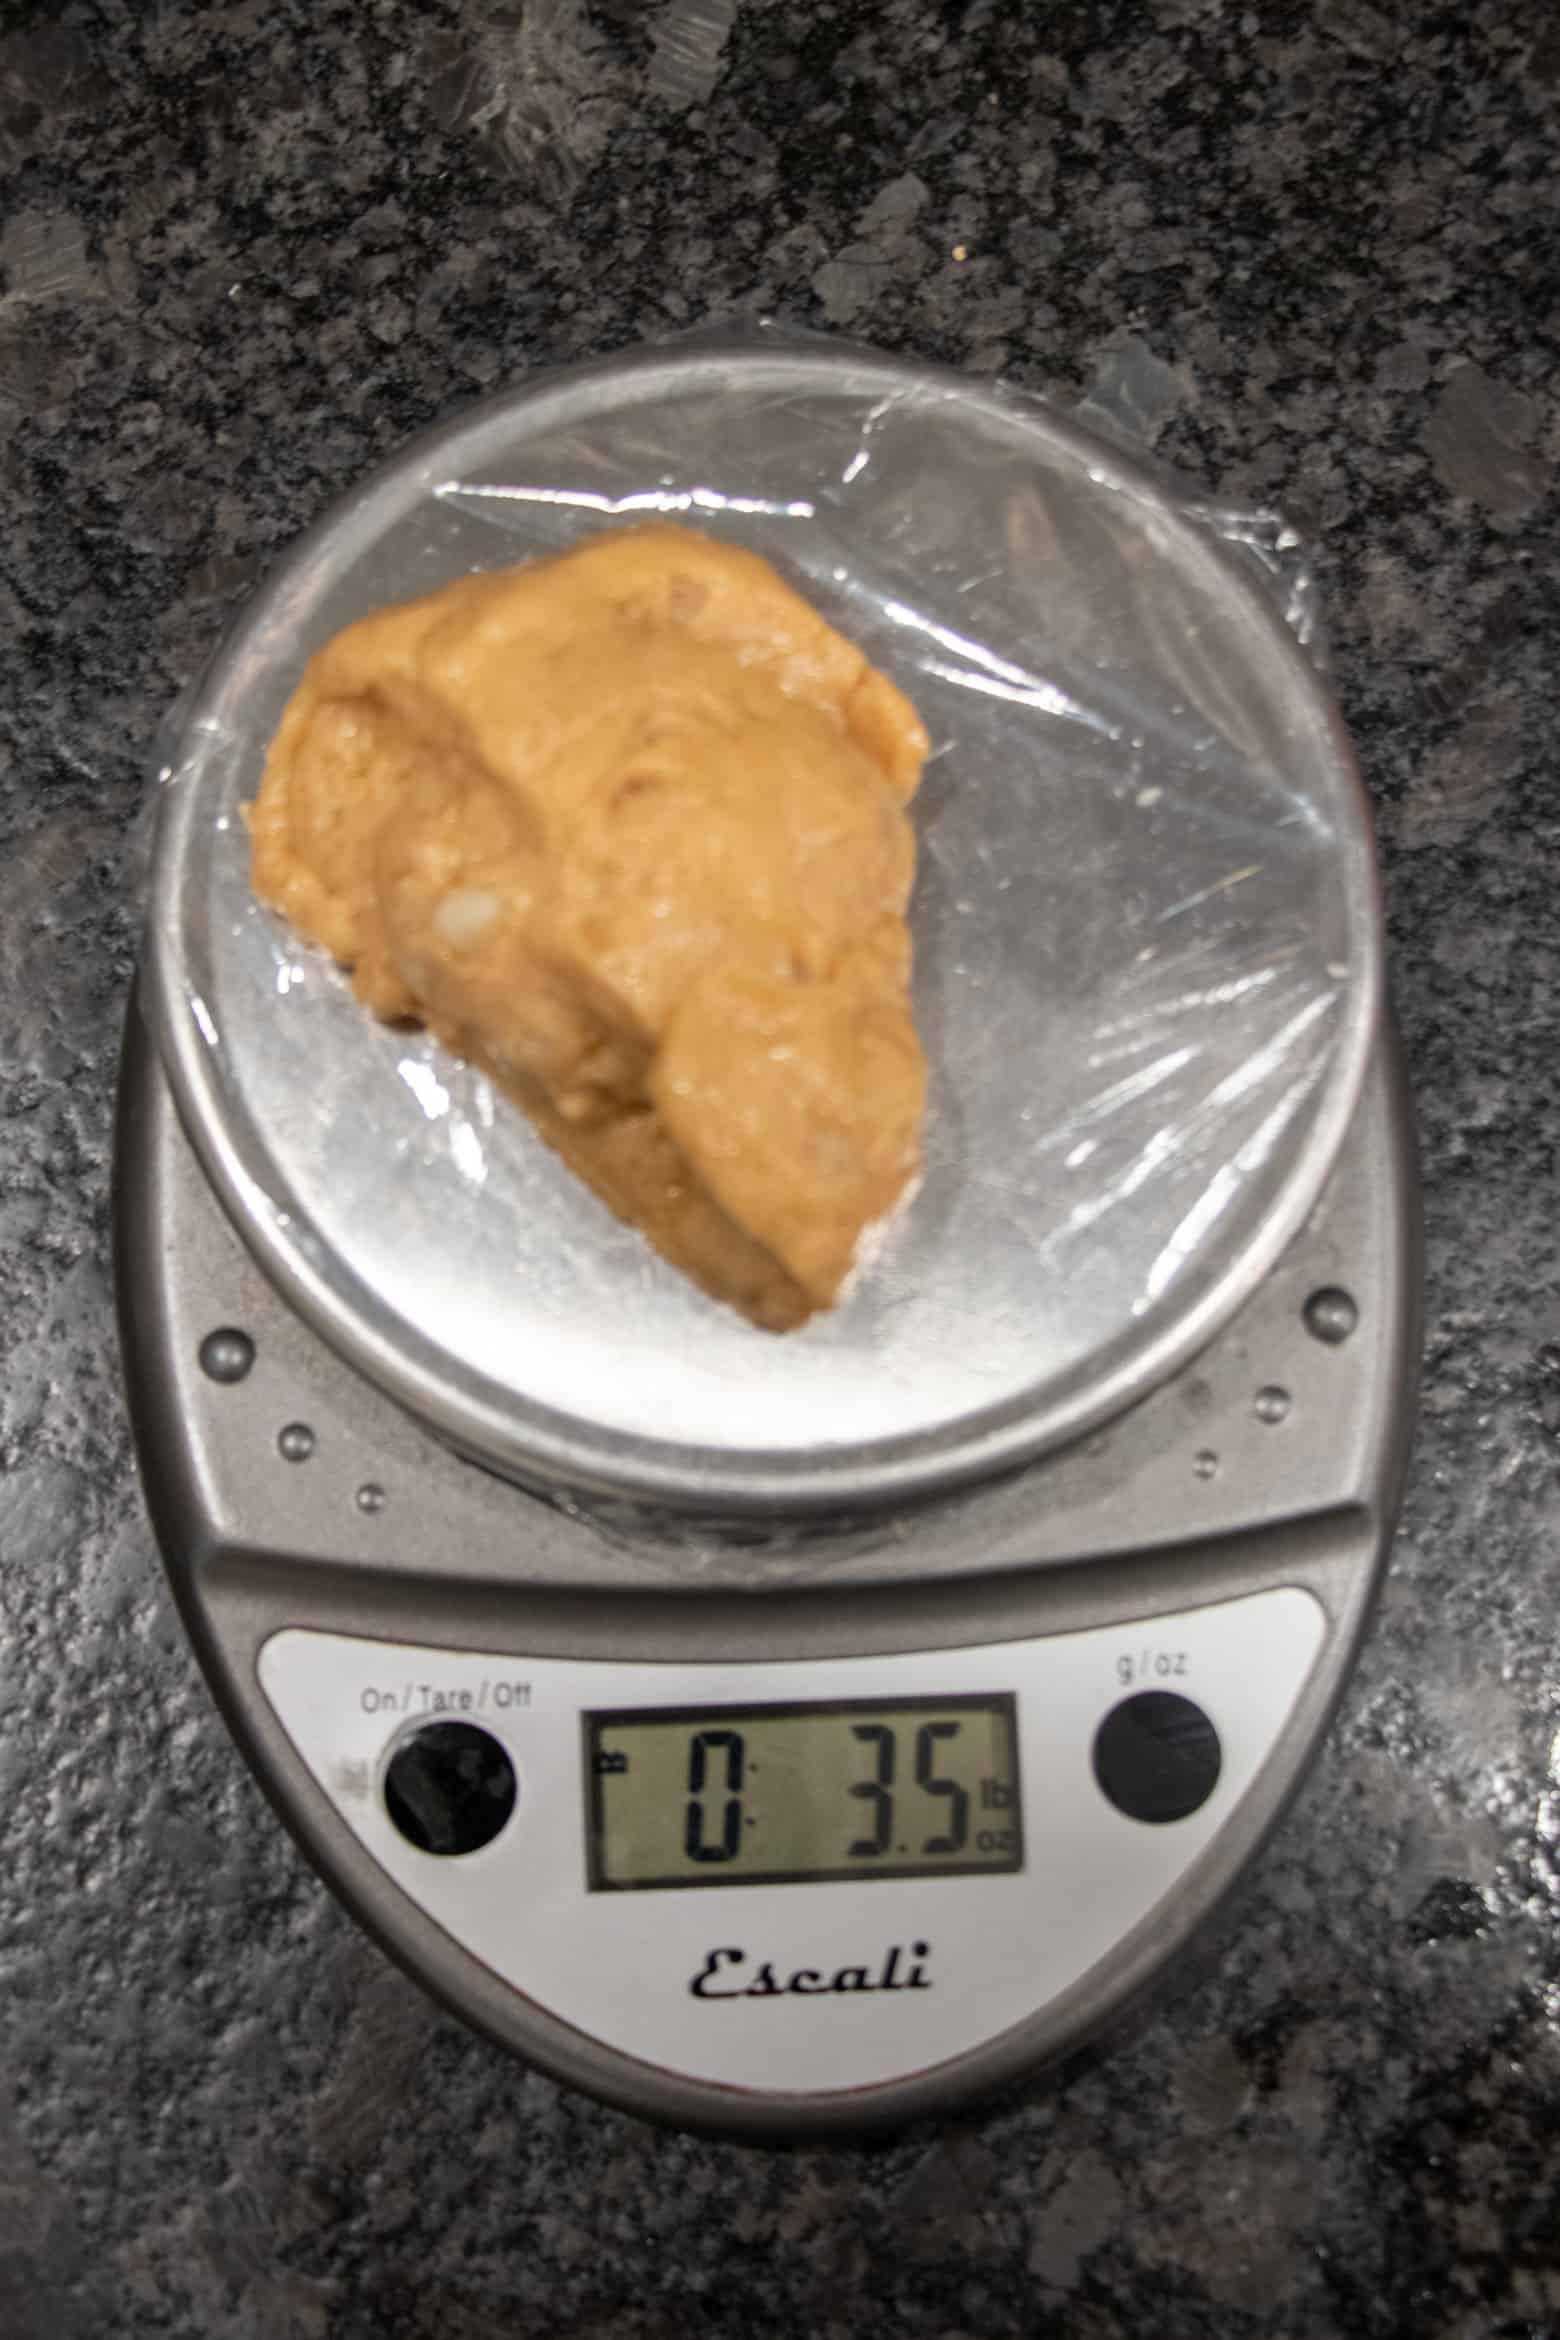 weighed dough on a scale to 3.5 ounces.